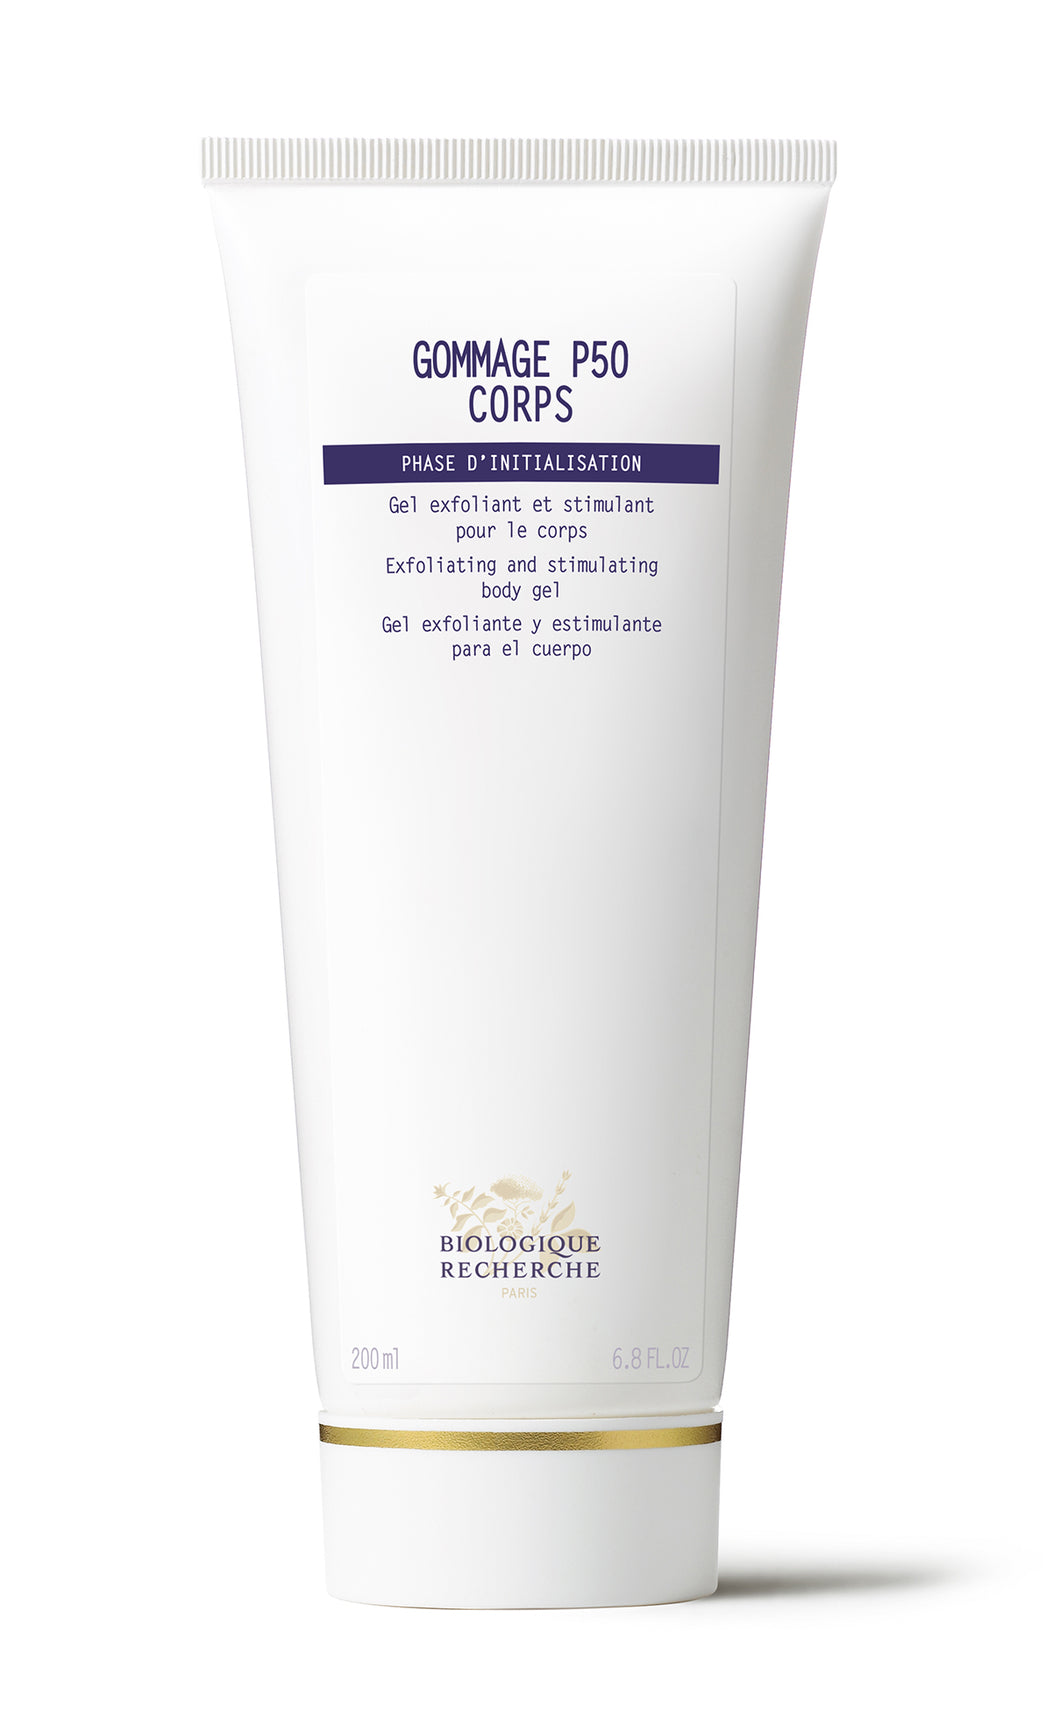 Gommage P50 Corps 200ml